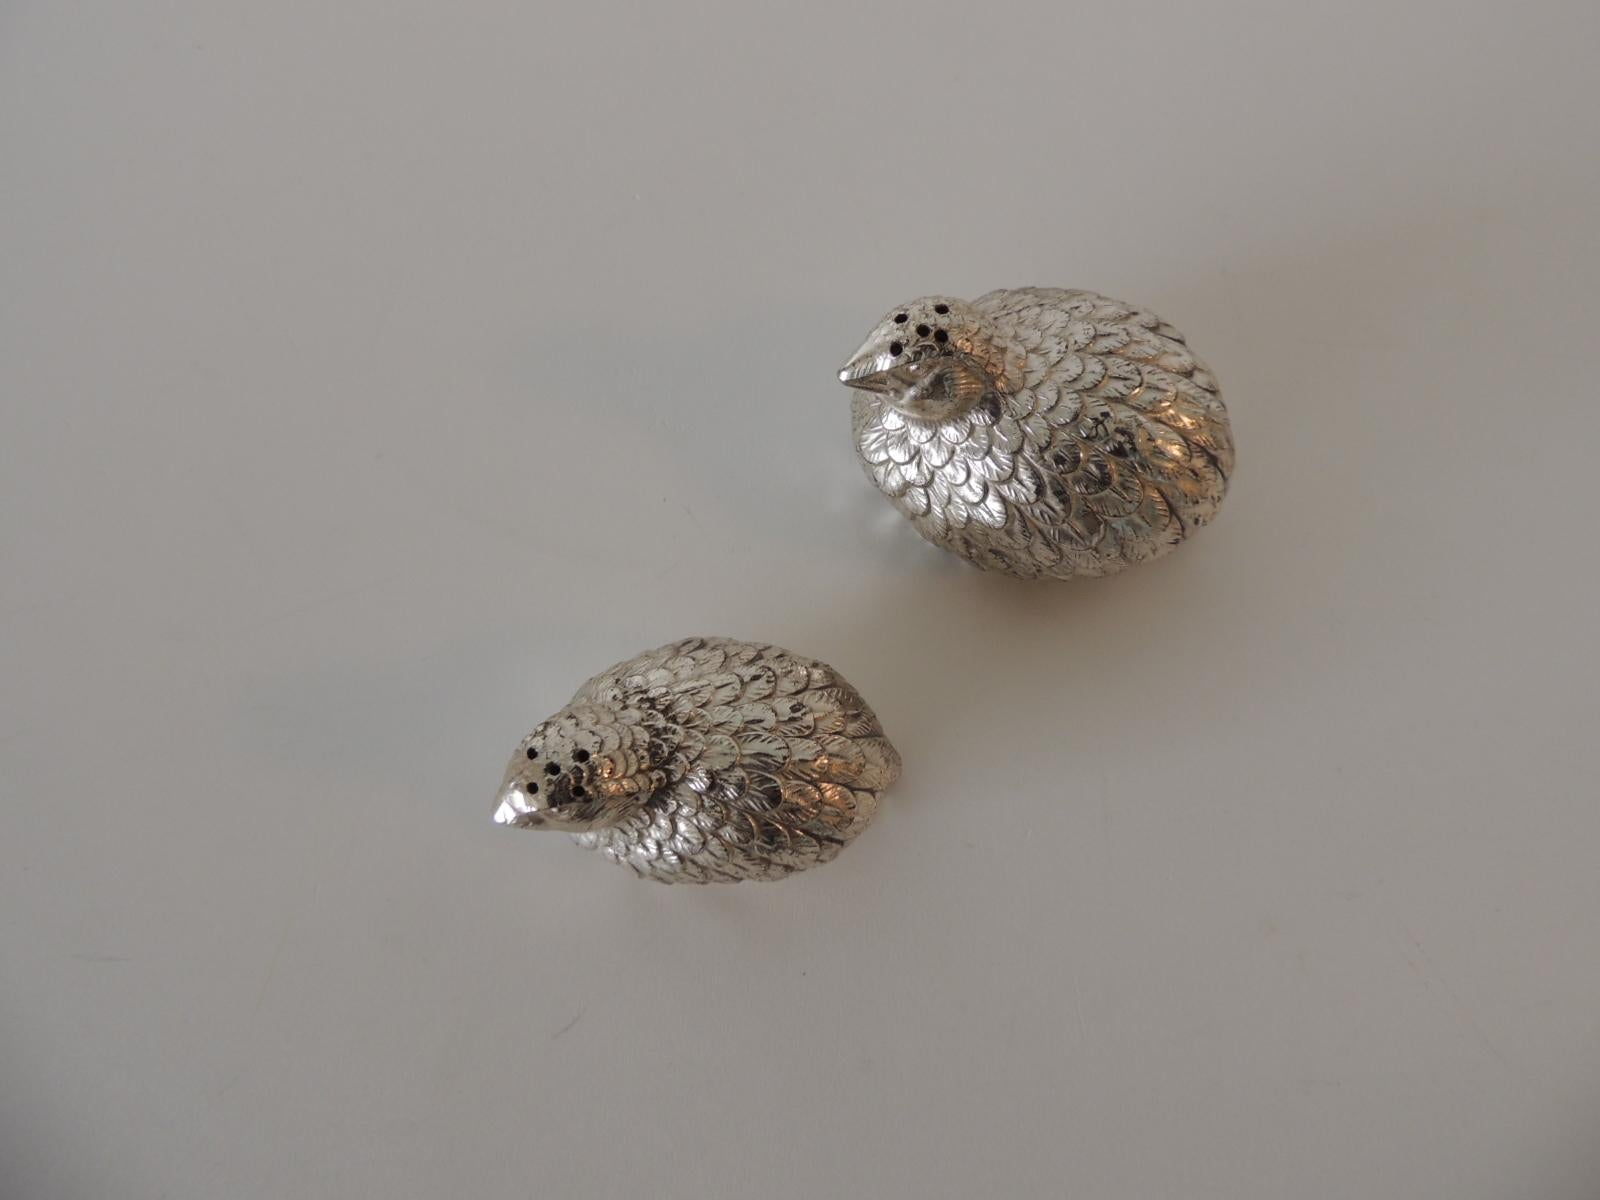 Pair of silver plated quails salt and pepper metal shakers
Sizes: 
Large: 3.5